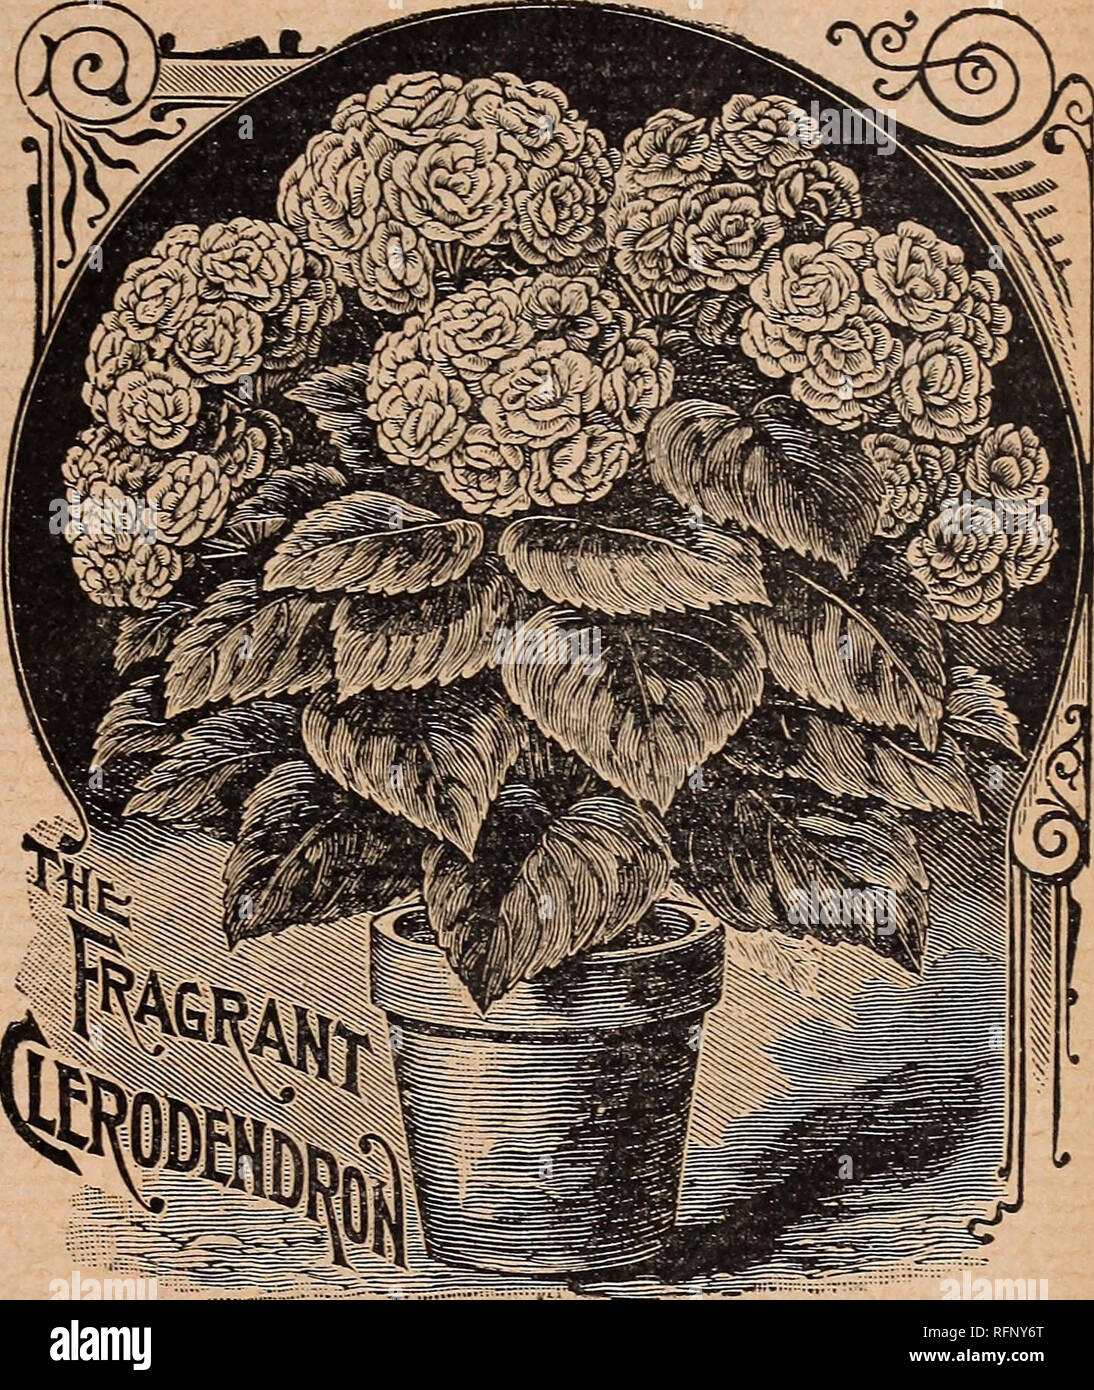 . Pearce's seeds, 1896. Nursery stock Ontario Catalogs; Flowers Seeds Catalogs; Vegetables Seeds Catalogs; Fruit Seeds Catalogs. JOHN S. PEARCE &amp; GO.—Plant Department. 43 19 THE FRACRANT CLERODeNDRON.. Our cut gives an excellent idea of the beauty of this plant. The large, tropical looking leaves and compact heads, of most exquisite waxy white flowers, are as delicious in fragrance as a gardenia or jessamine. A single bunch could well form a bouquet in itself. Add to this its easy growth as a pot-plant and the fact that it is almost hardy, and little more is needed to make it popular. A na Stock Photo